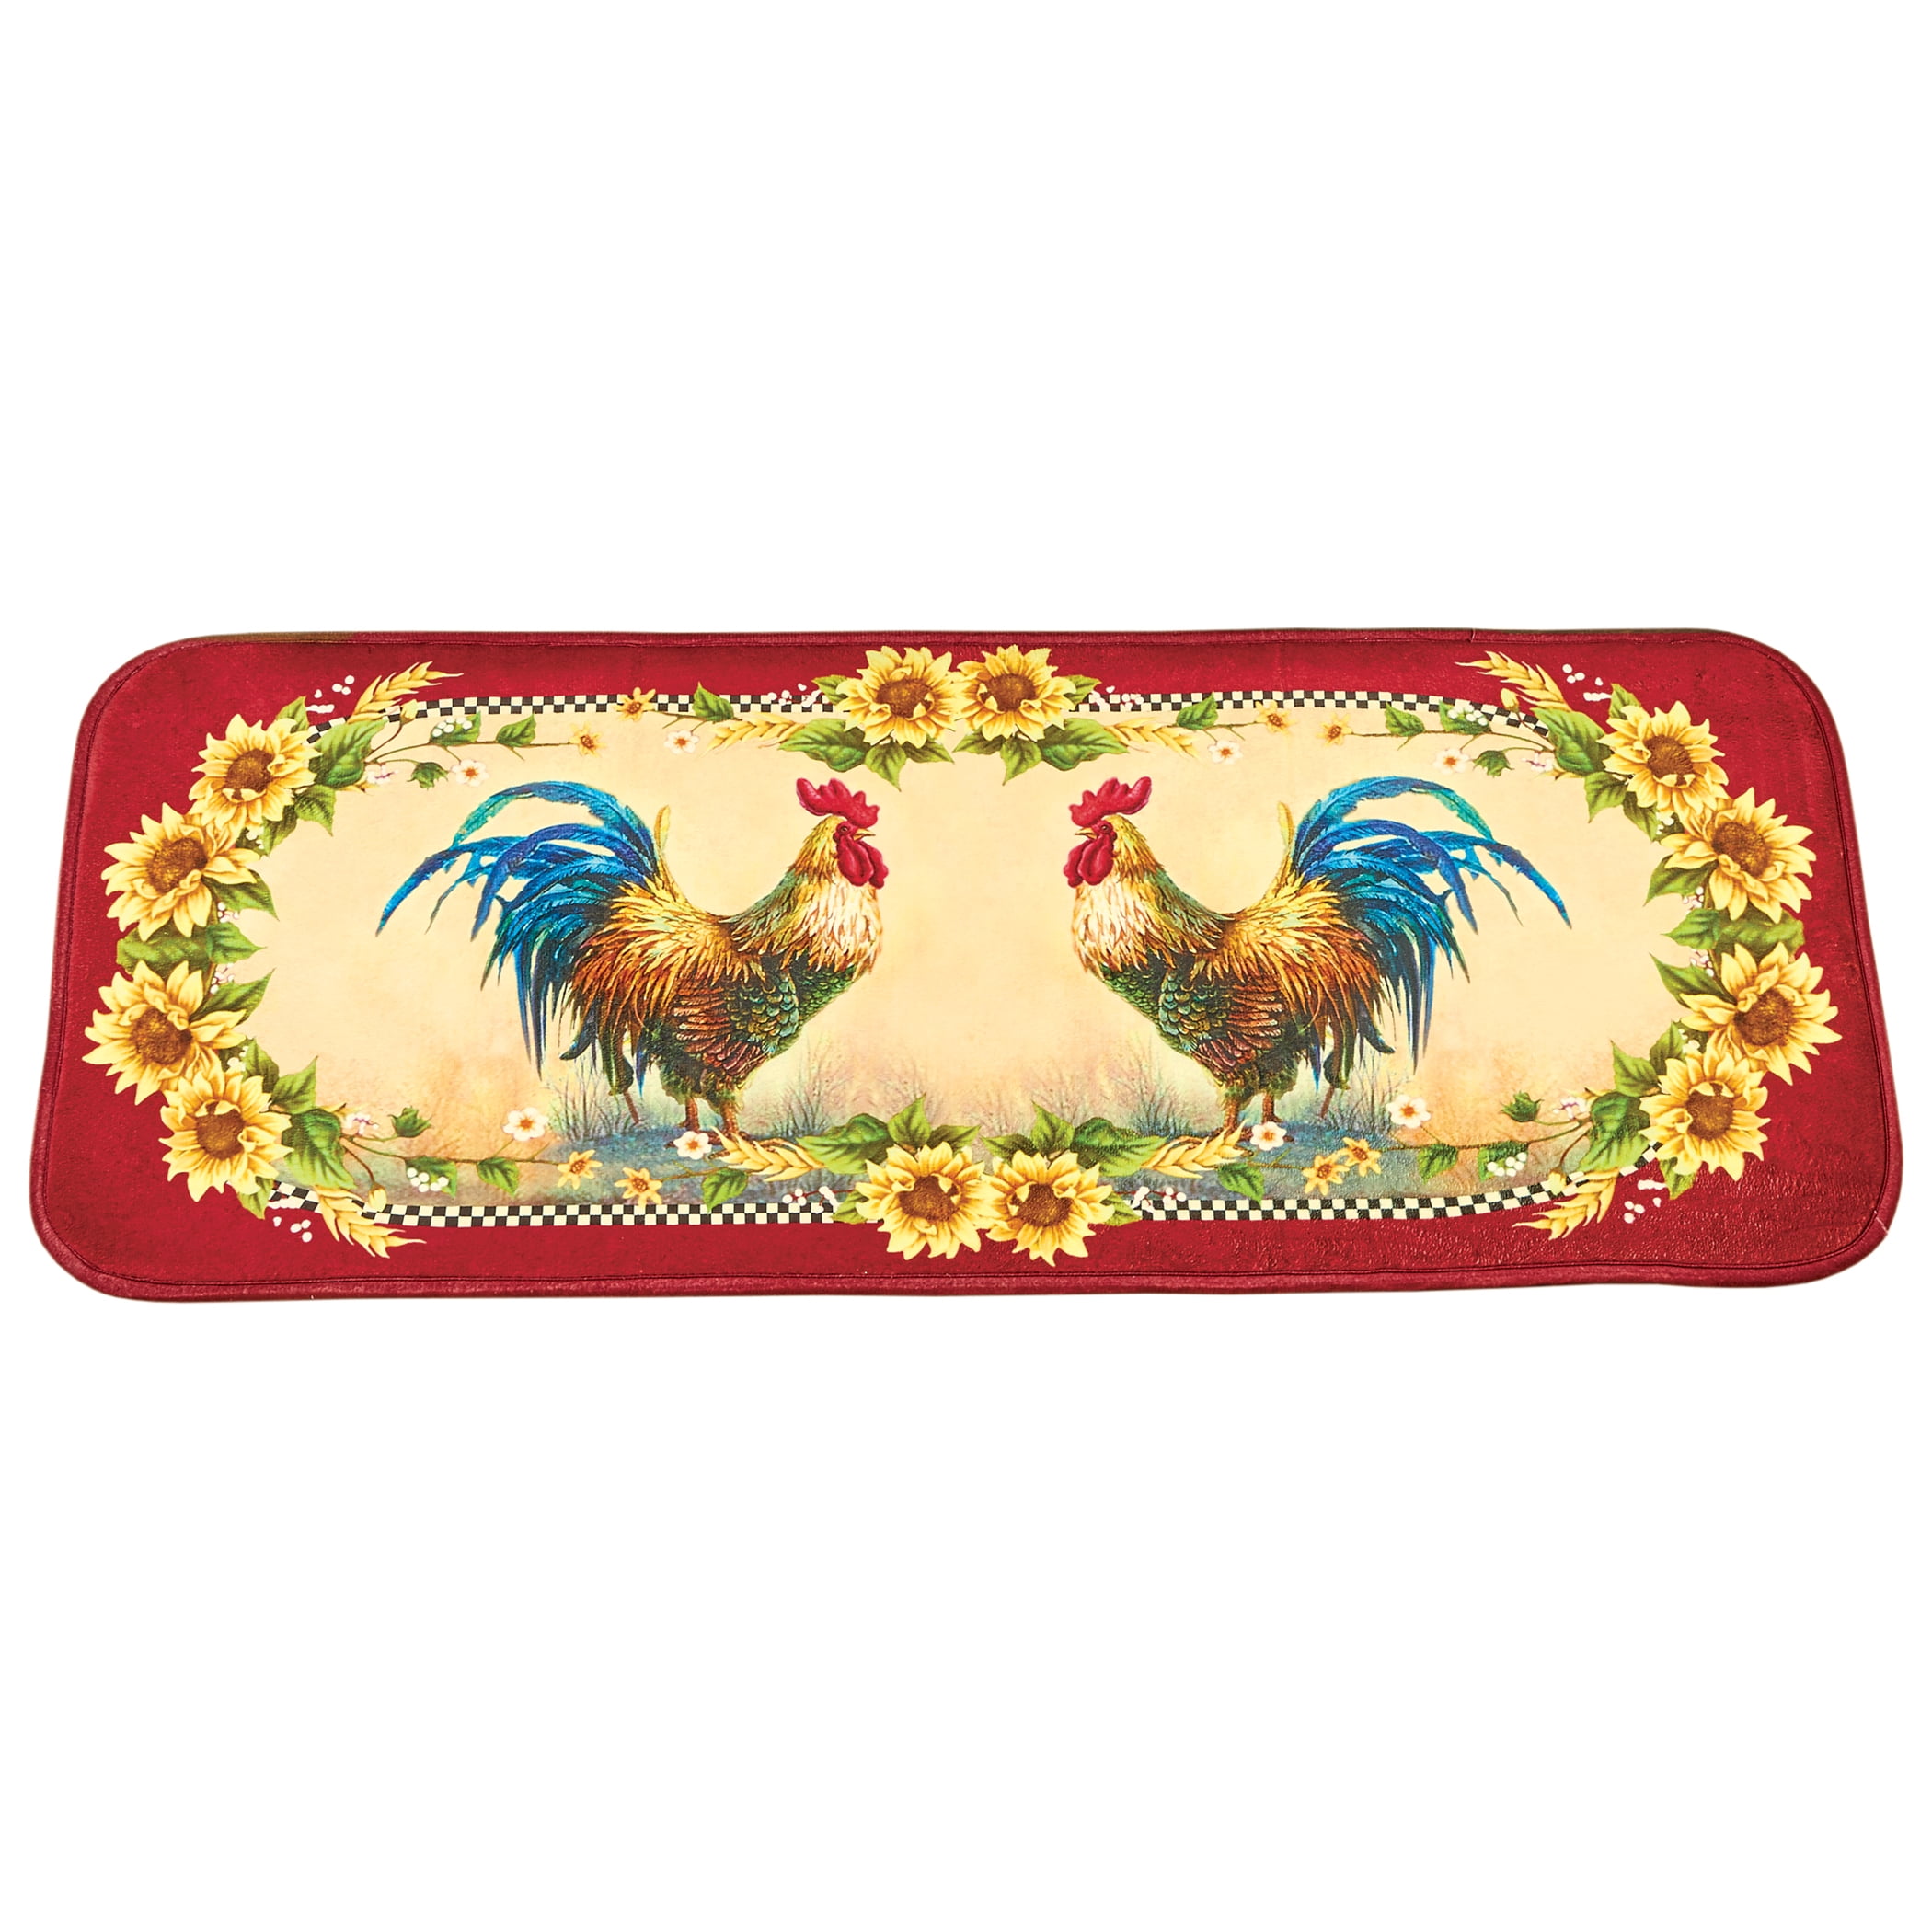 2 French Country ROOSTERS Floral Scroll Printed Cotton Kitchen Towels 15" x 25" 